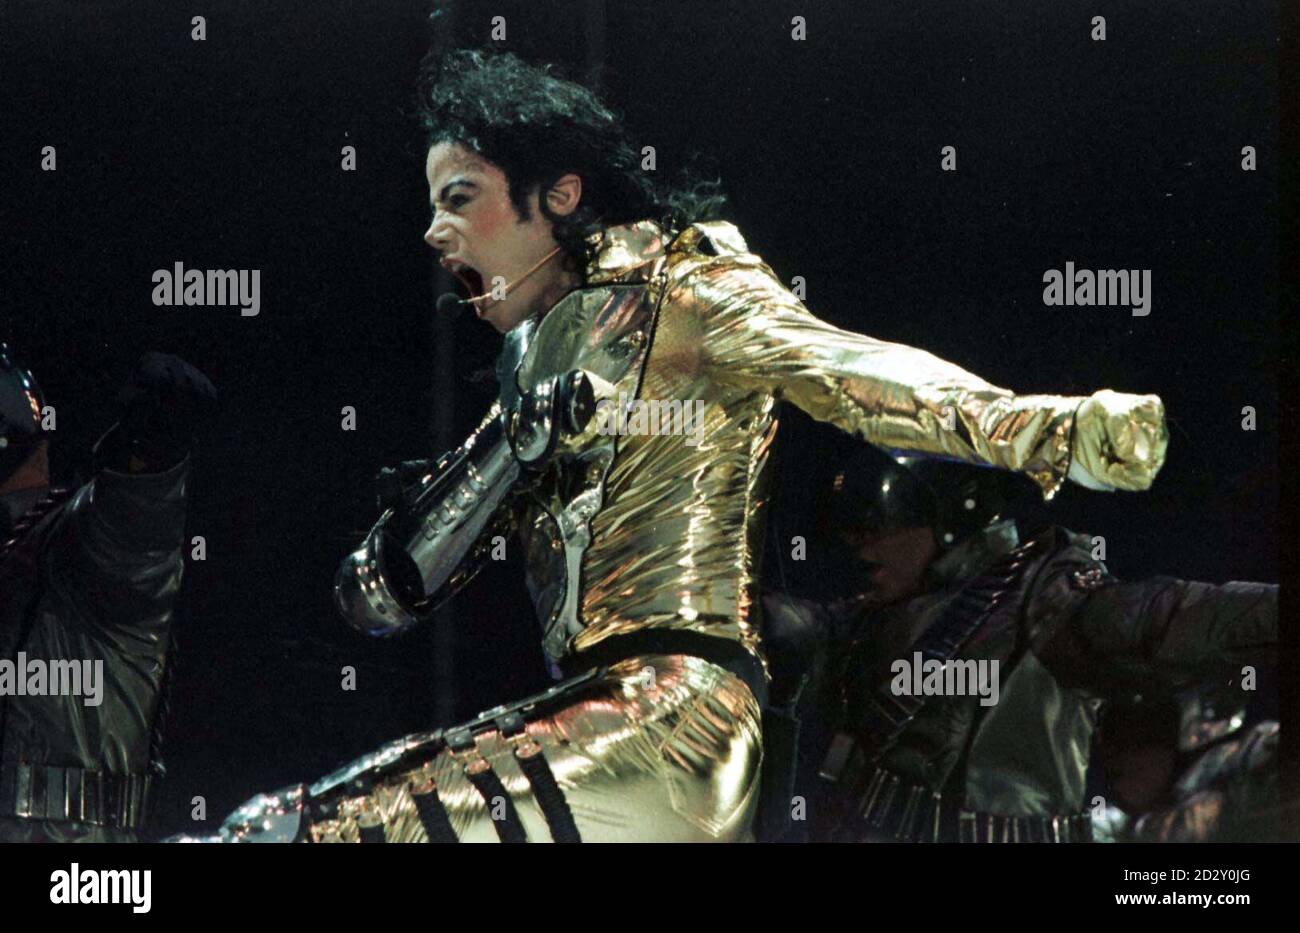 FOR IN CONNECTION WITH COVERAGE OF TONIGHT'S CONCERT (ONE USE ONLY) : American super star Michael Jackson on stage at the Don Valley Stadium, Sheffield, during the first of his concerts this evening (Wednesday). Photo by Owen Humphreys/PA. Stock Photo